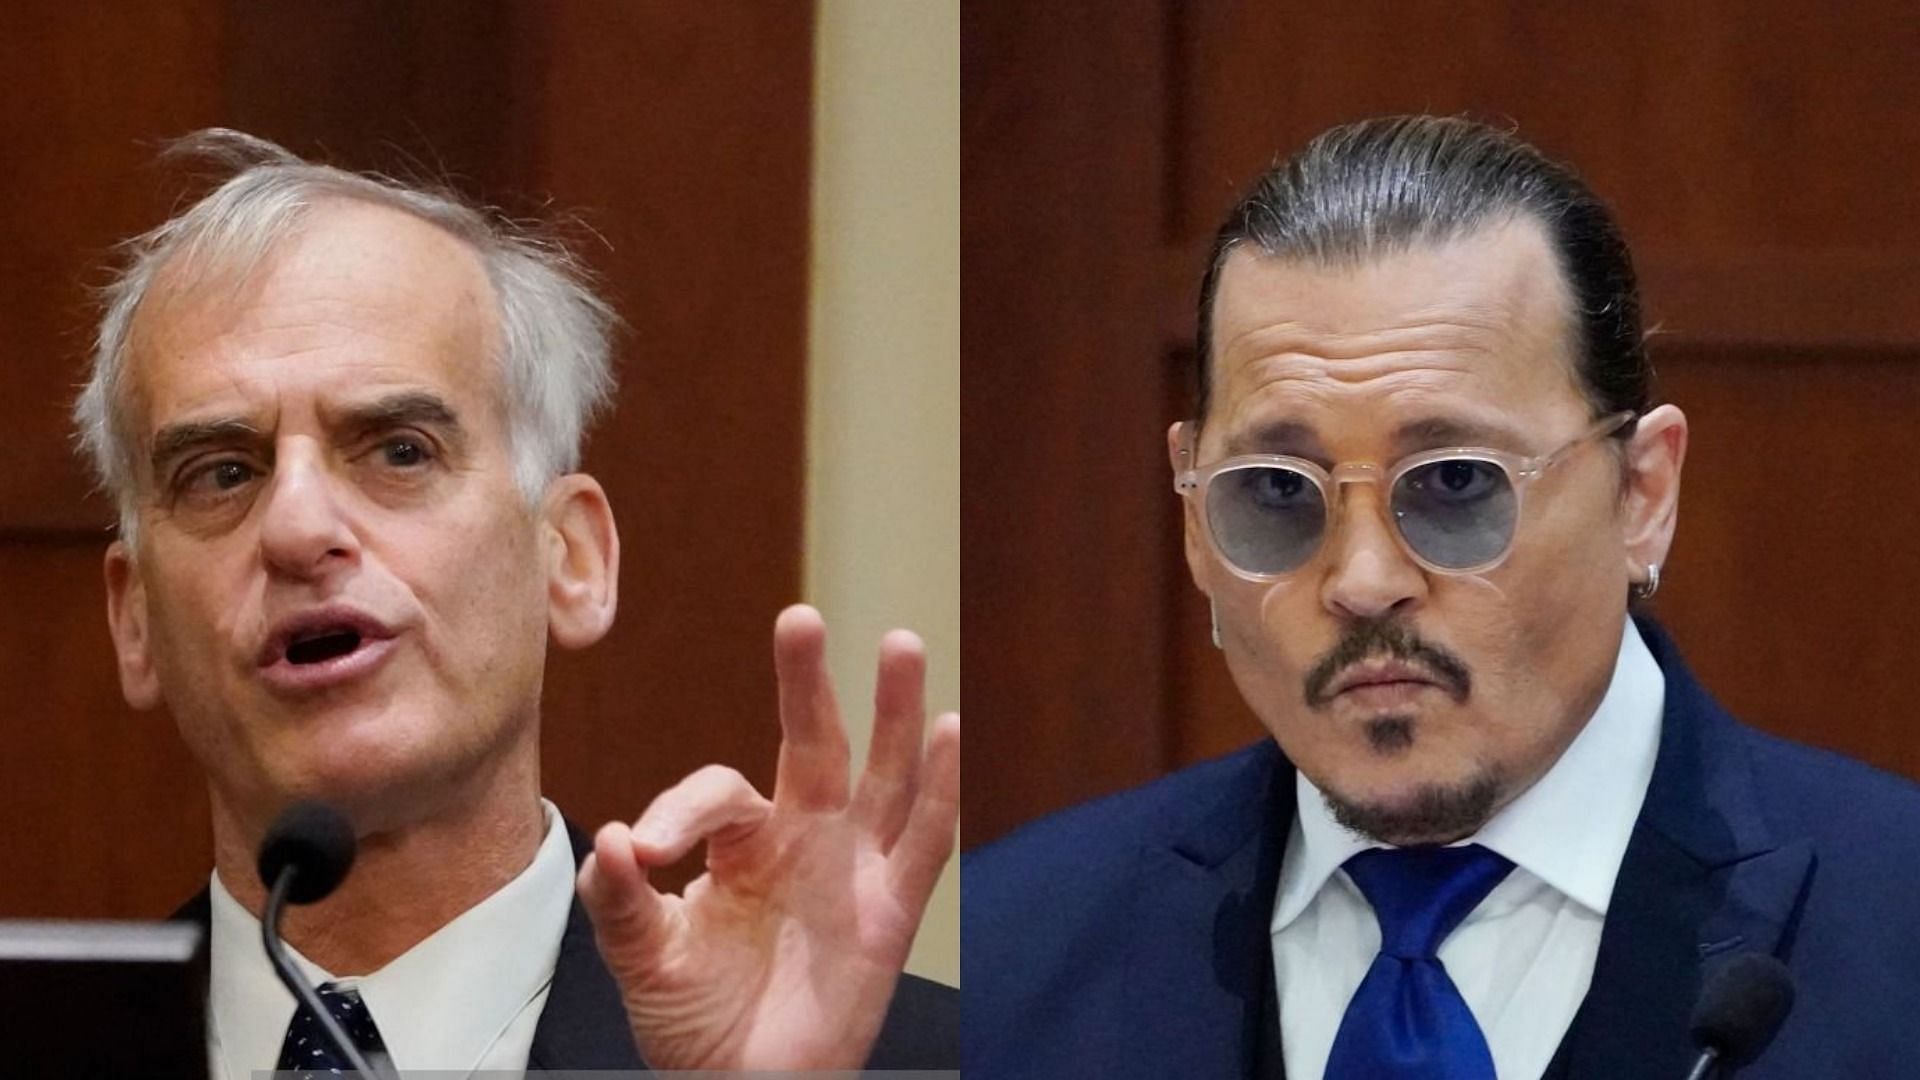 Dr David Spiegel testified he never saw &#039;Charlie and the Chocolate Factory&#039; during Johnny Depp vs. Amber Heard trial (Image via Steve Helber/Getty Images)